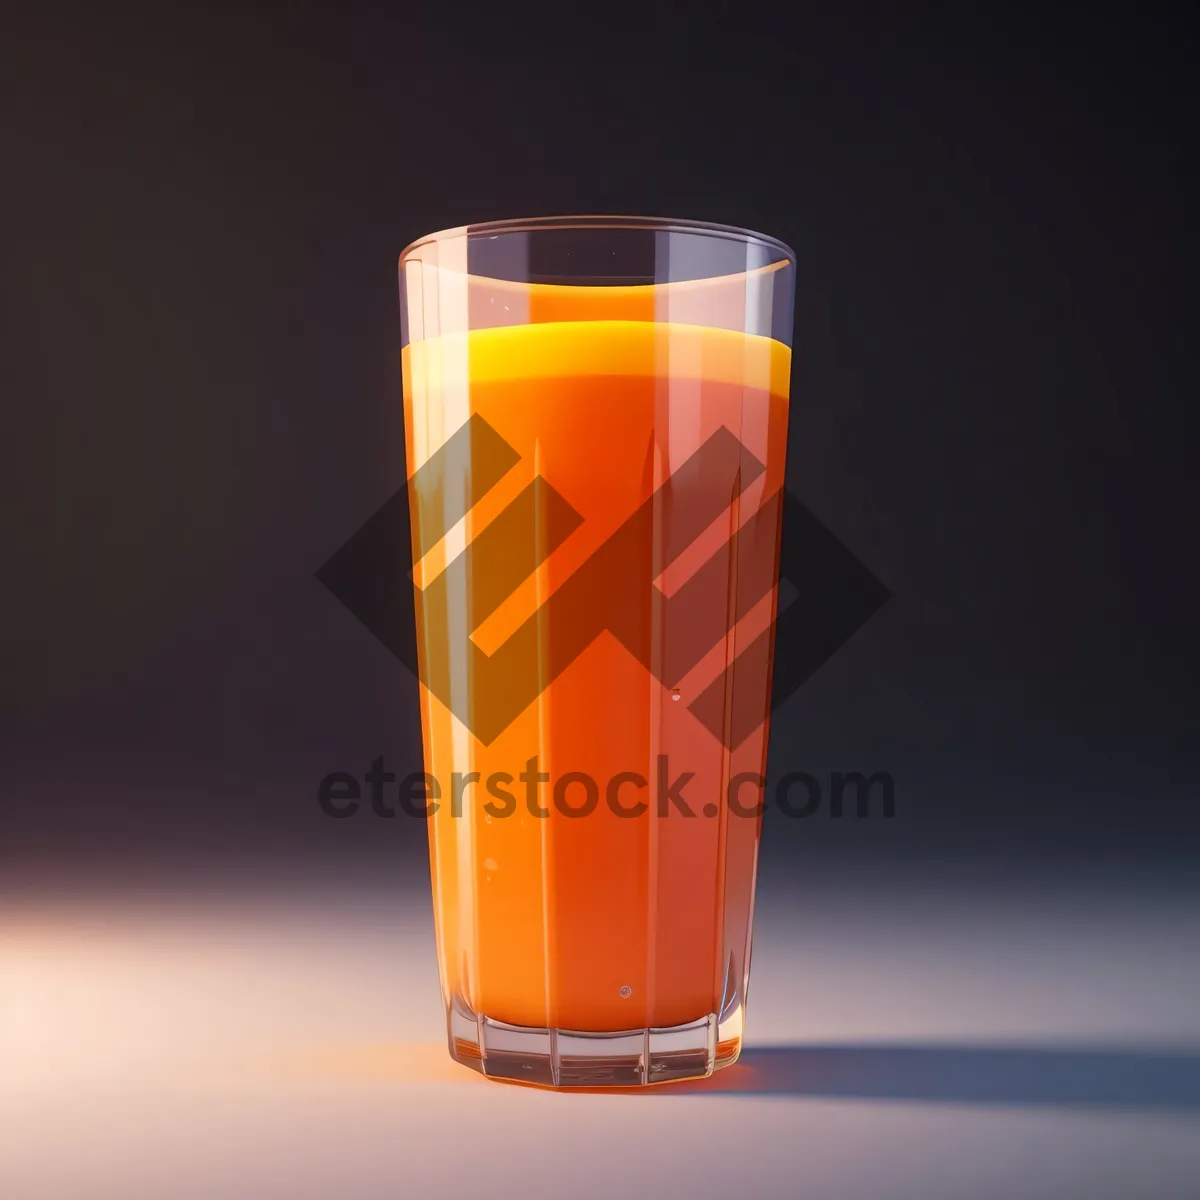 Picture of Refreshing citrus cocktail in glass with frothy golden froth.